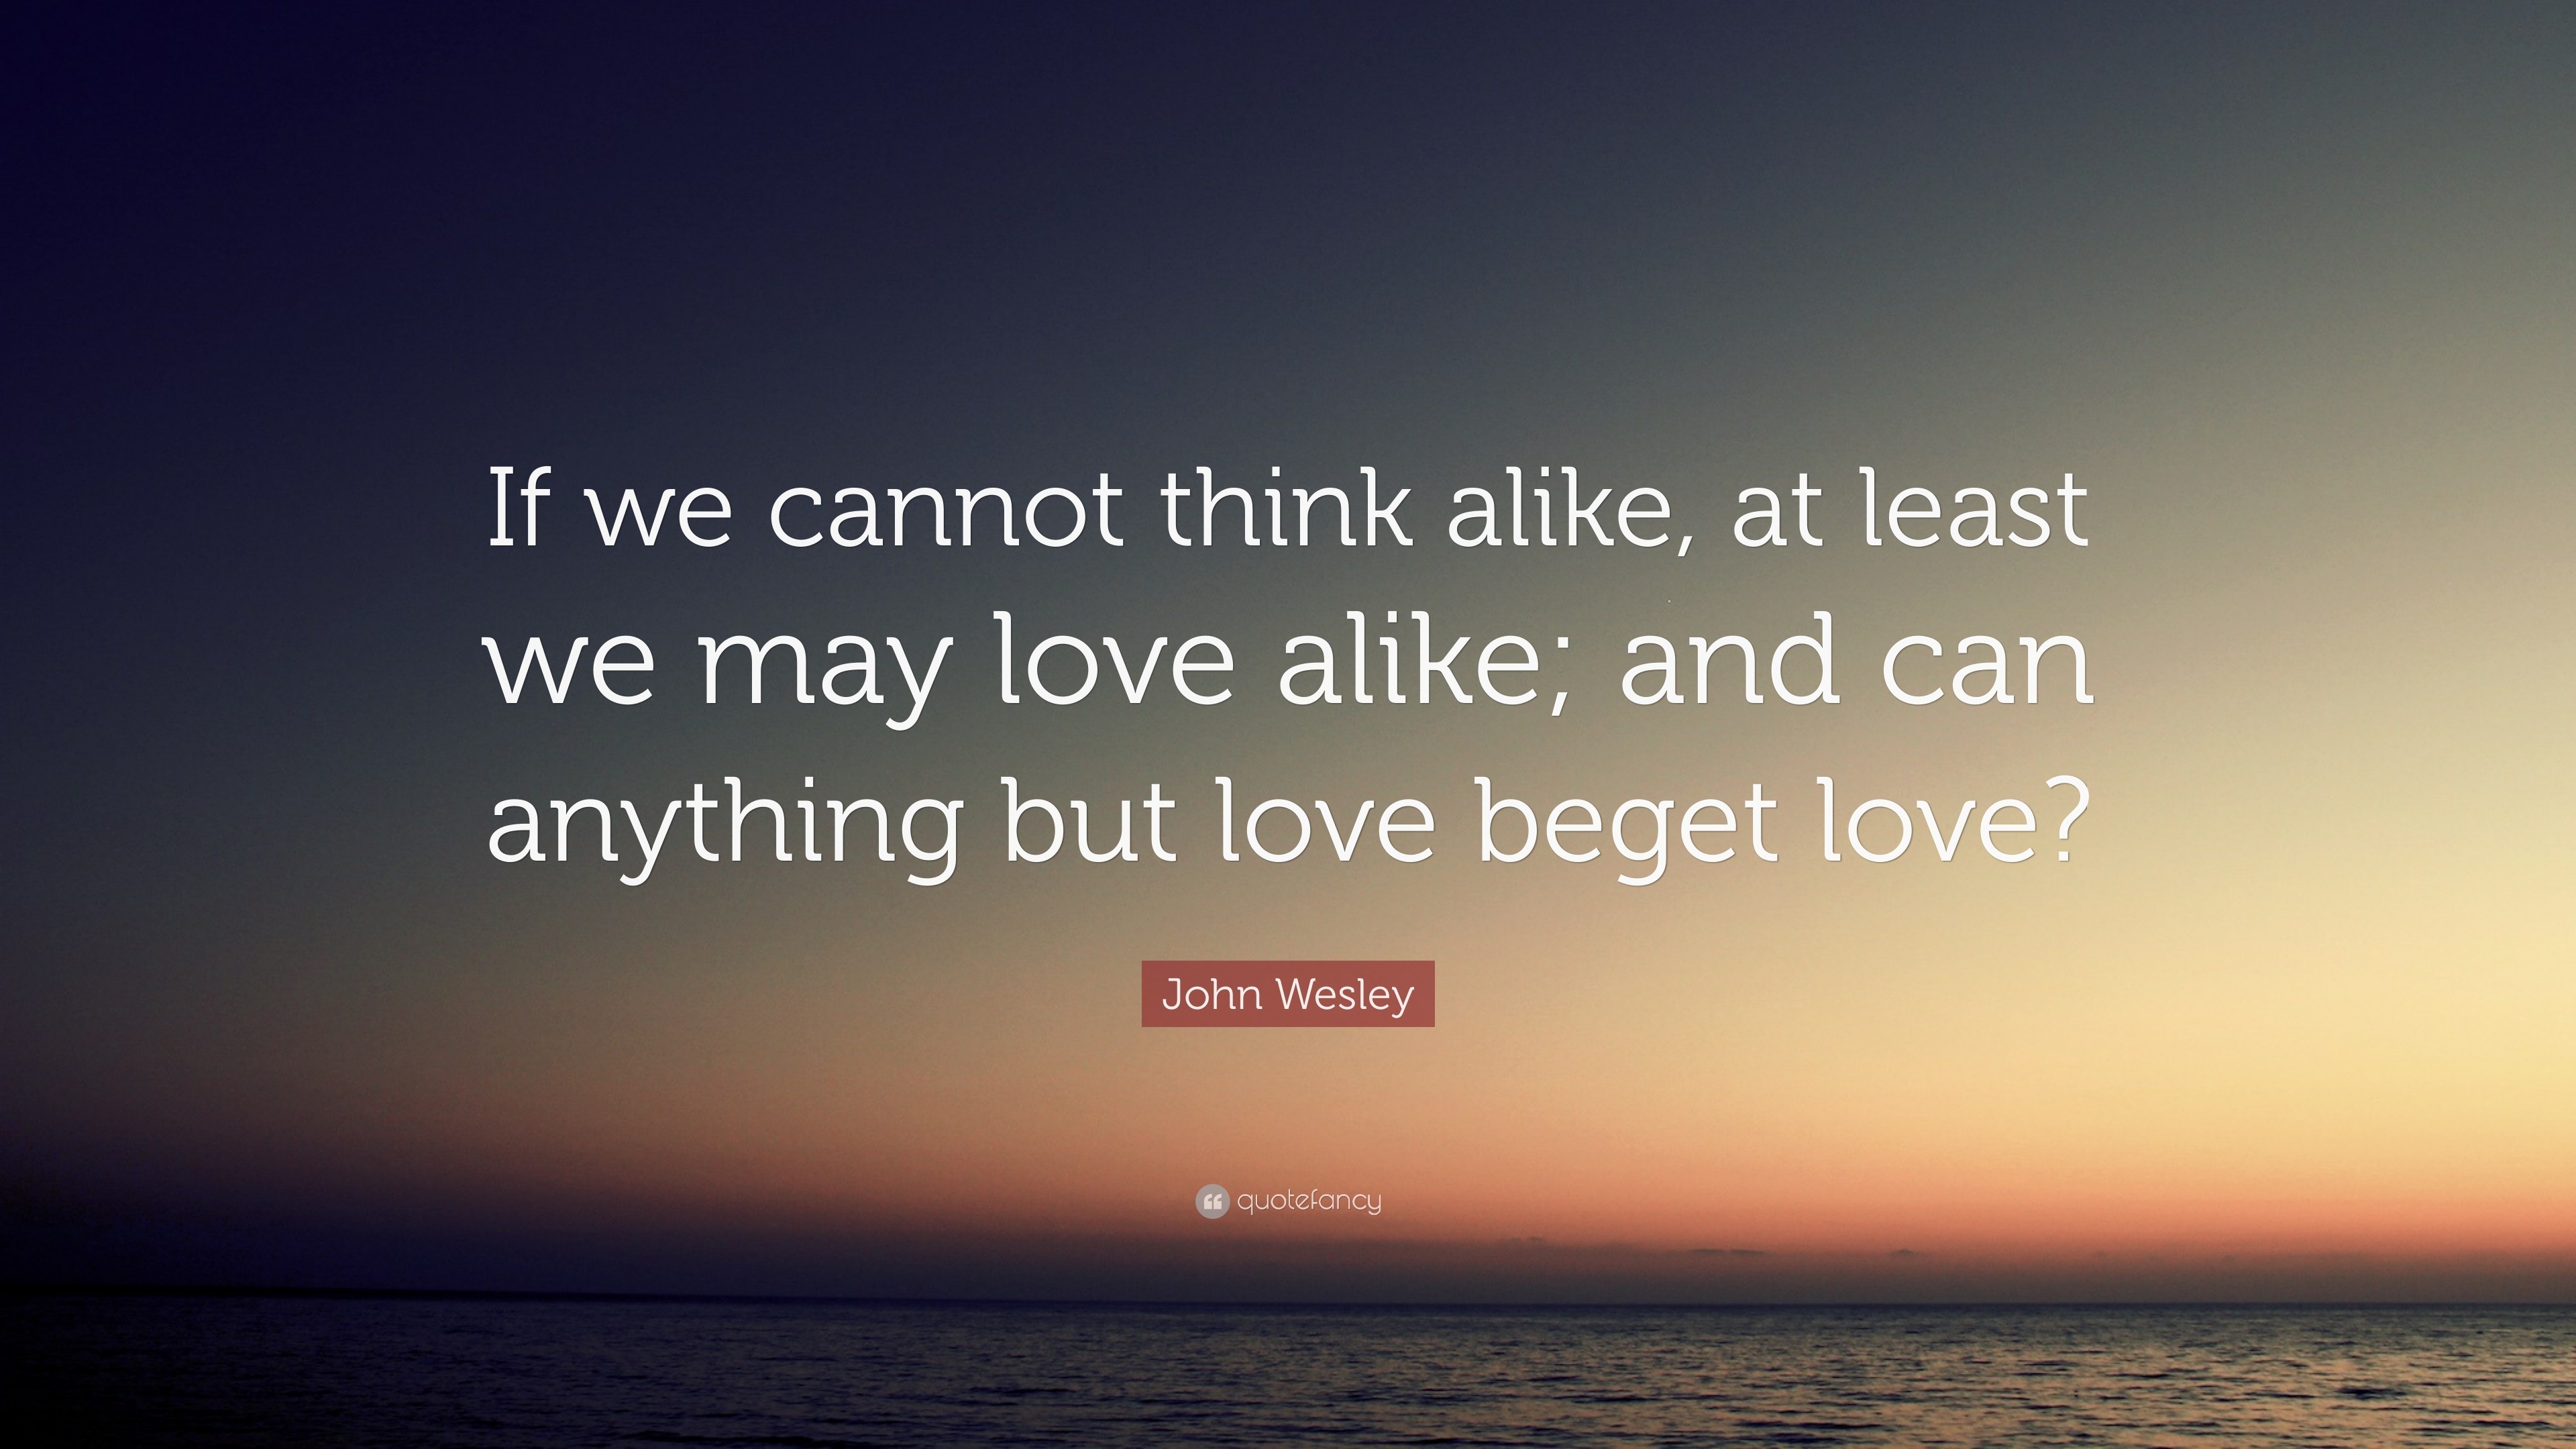 John Wesley Quote: “If we cannot think alike, at least we may love ...